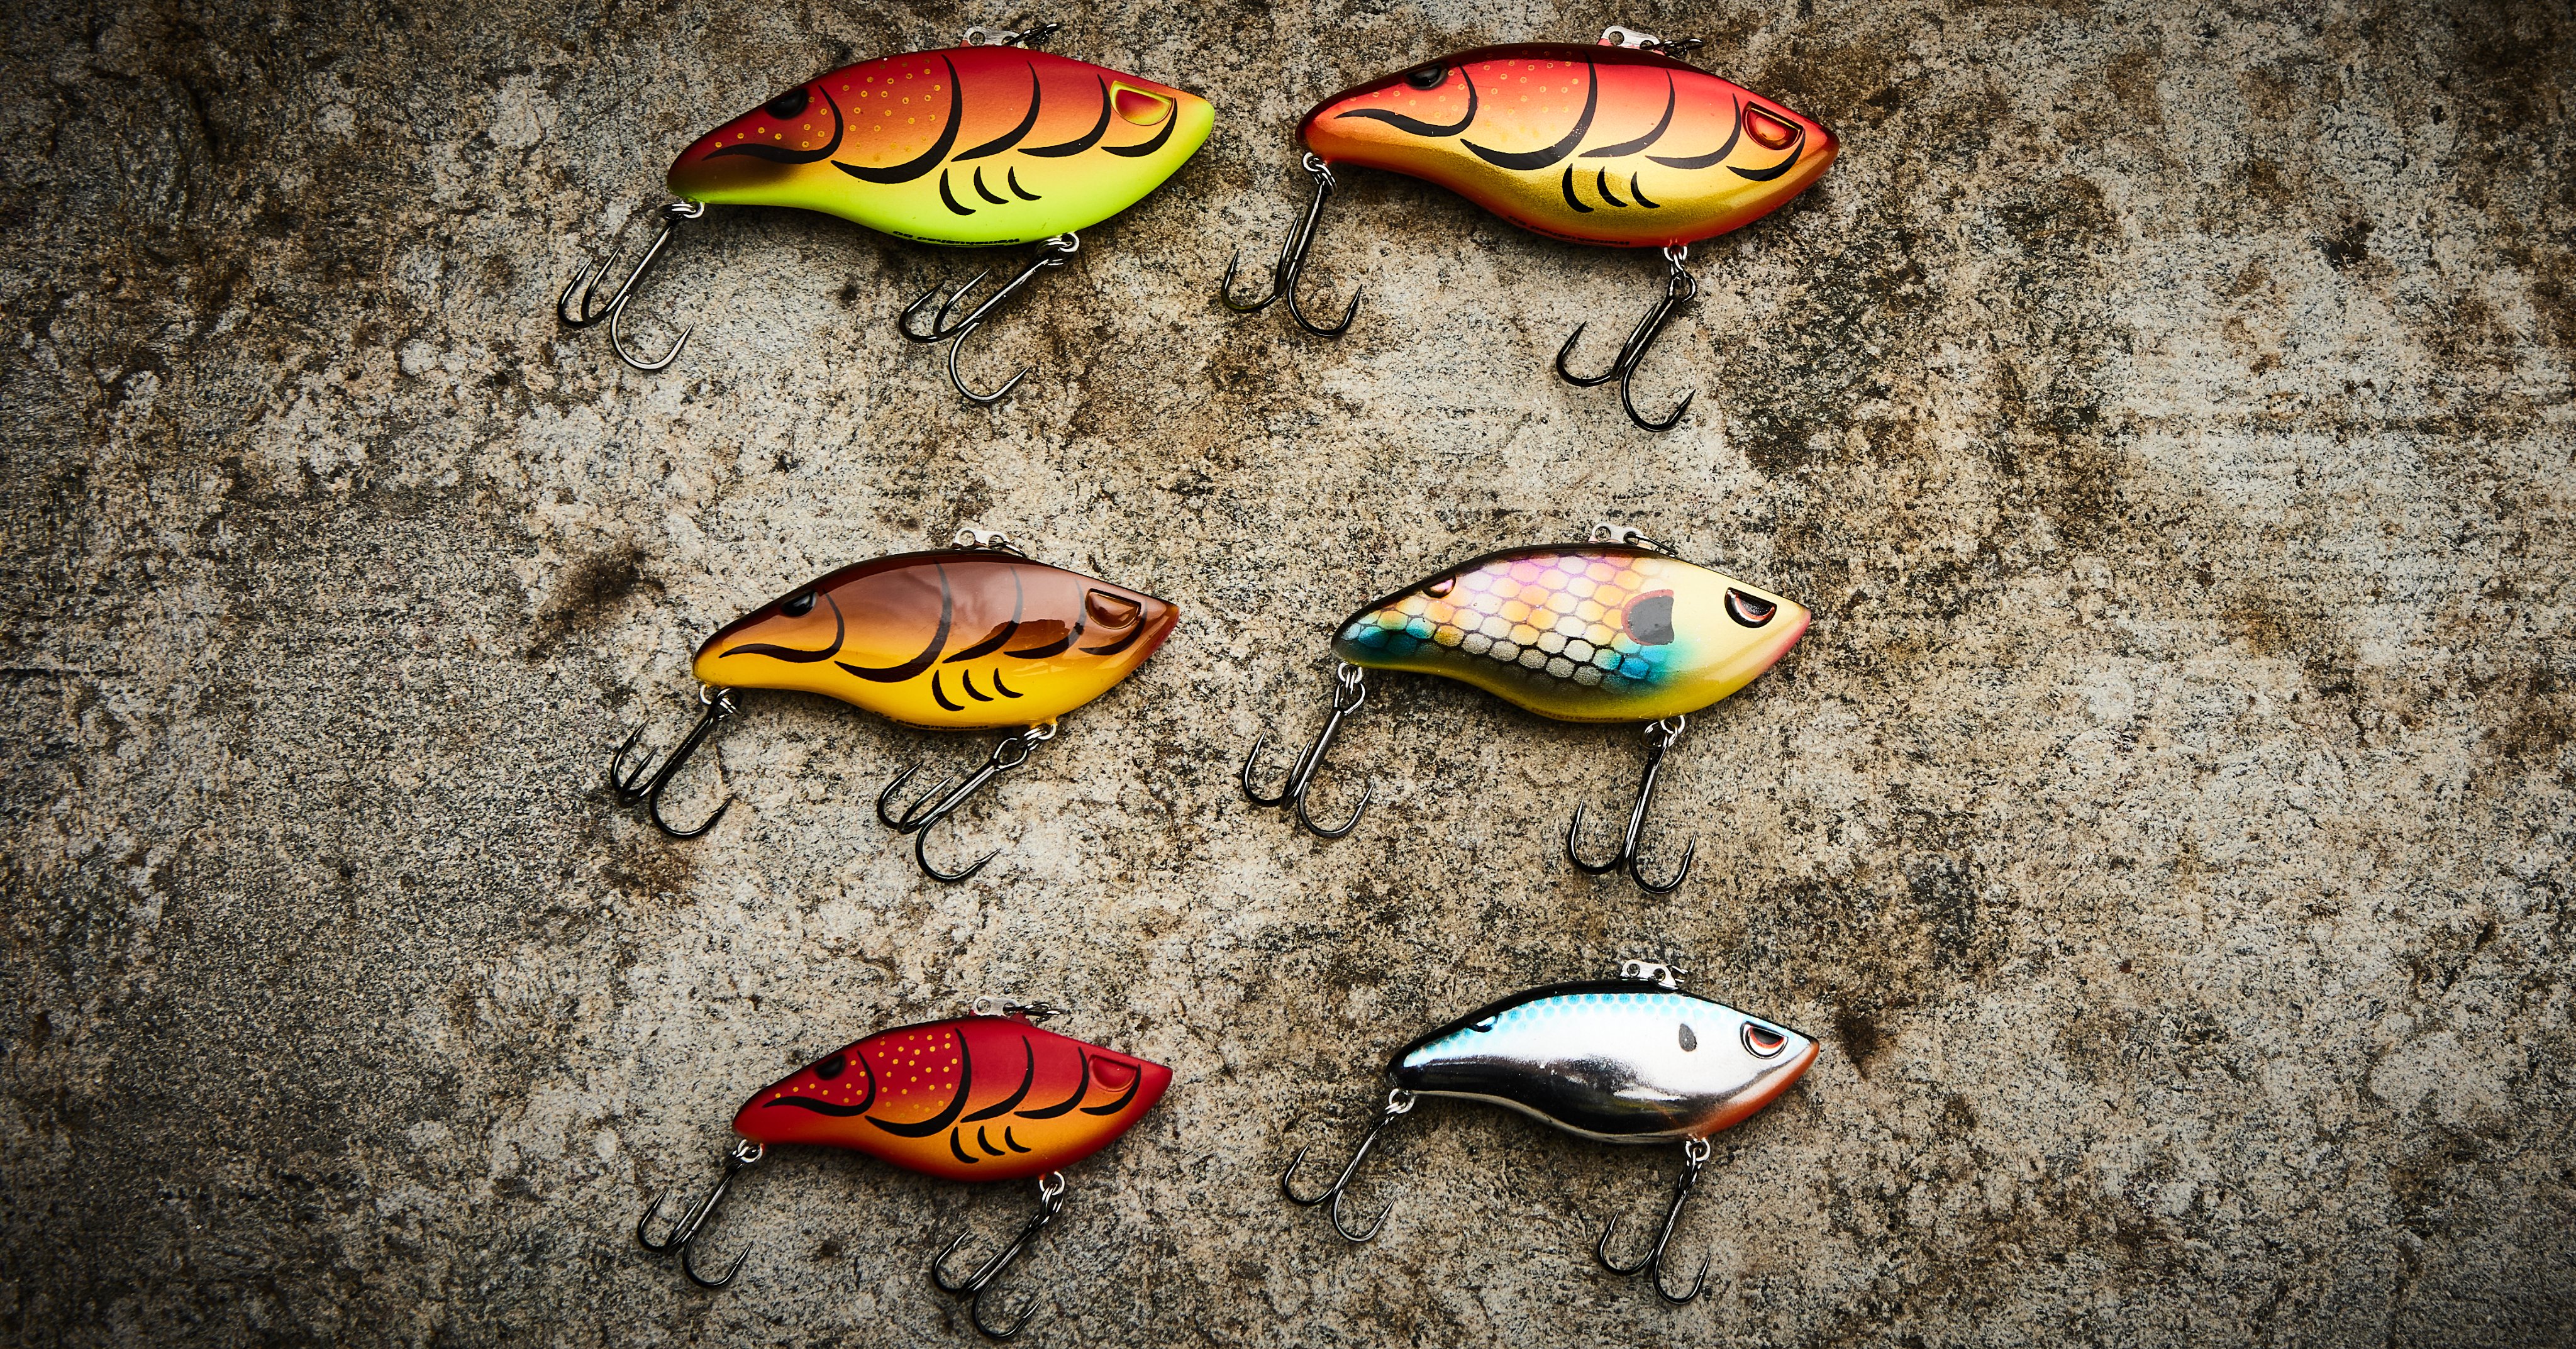 Tackle Warehouse on X: 🔥DAILY SPECIAL🔥 Shop Now 👉   59% Off SPRO Wameku Shad Lipless Crankbait Now:  $5.23 - $9.74, Save: $3.00 - $7.76, 59% Off #TackleWarehouse  #TWdailySpecial #BassFishing #Fishing